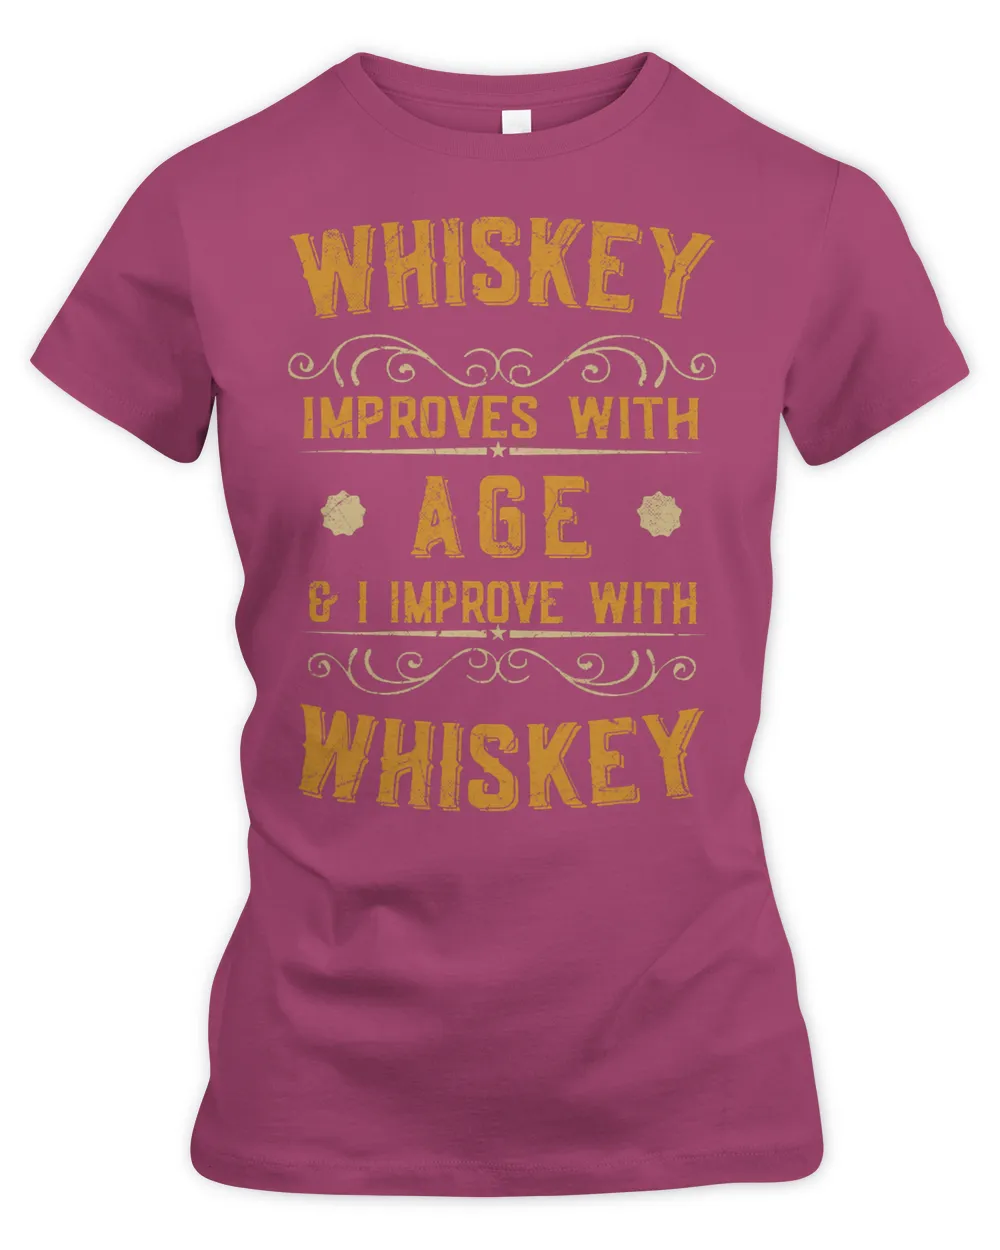 Whiskey improves with age and I improve with whiskey bourbon